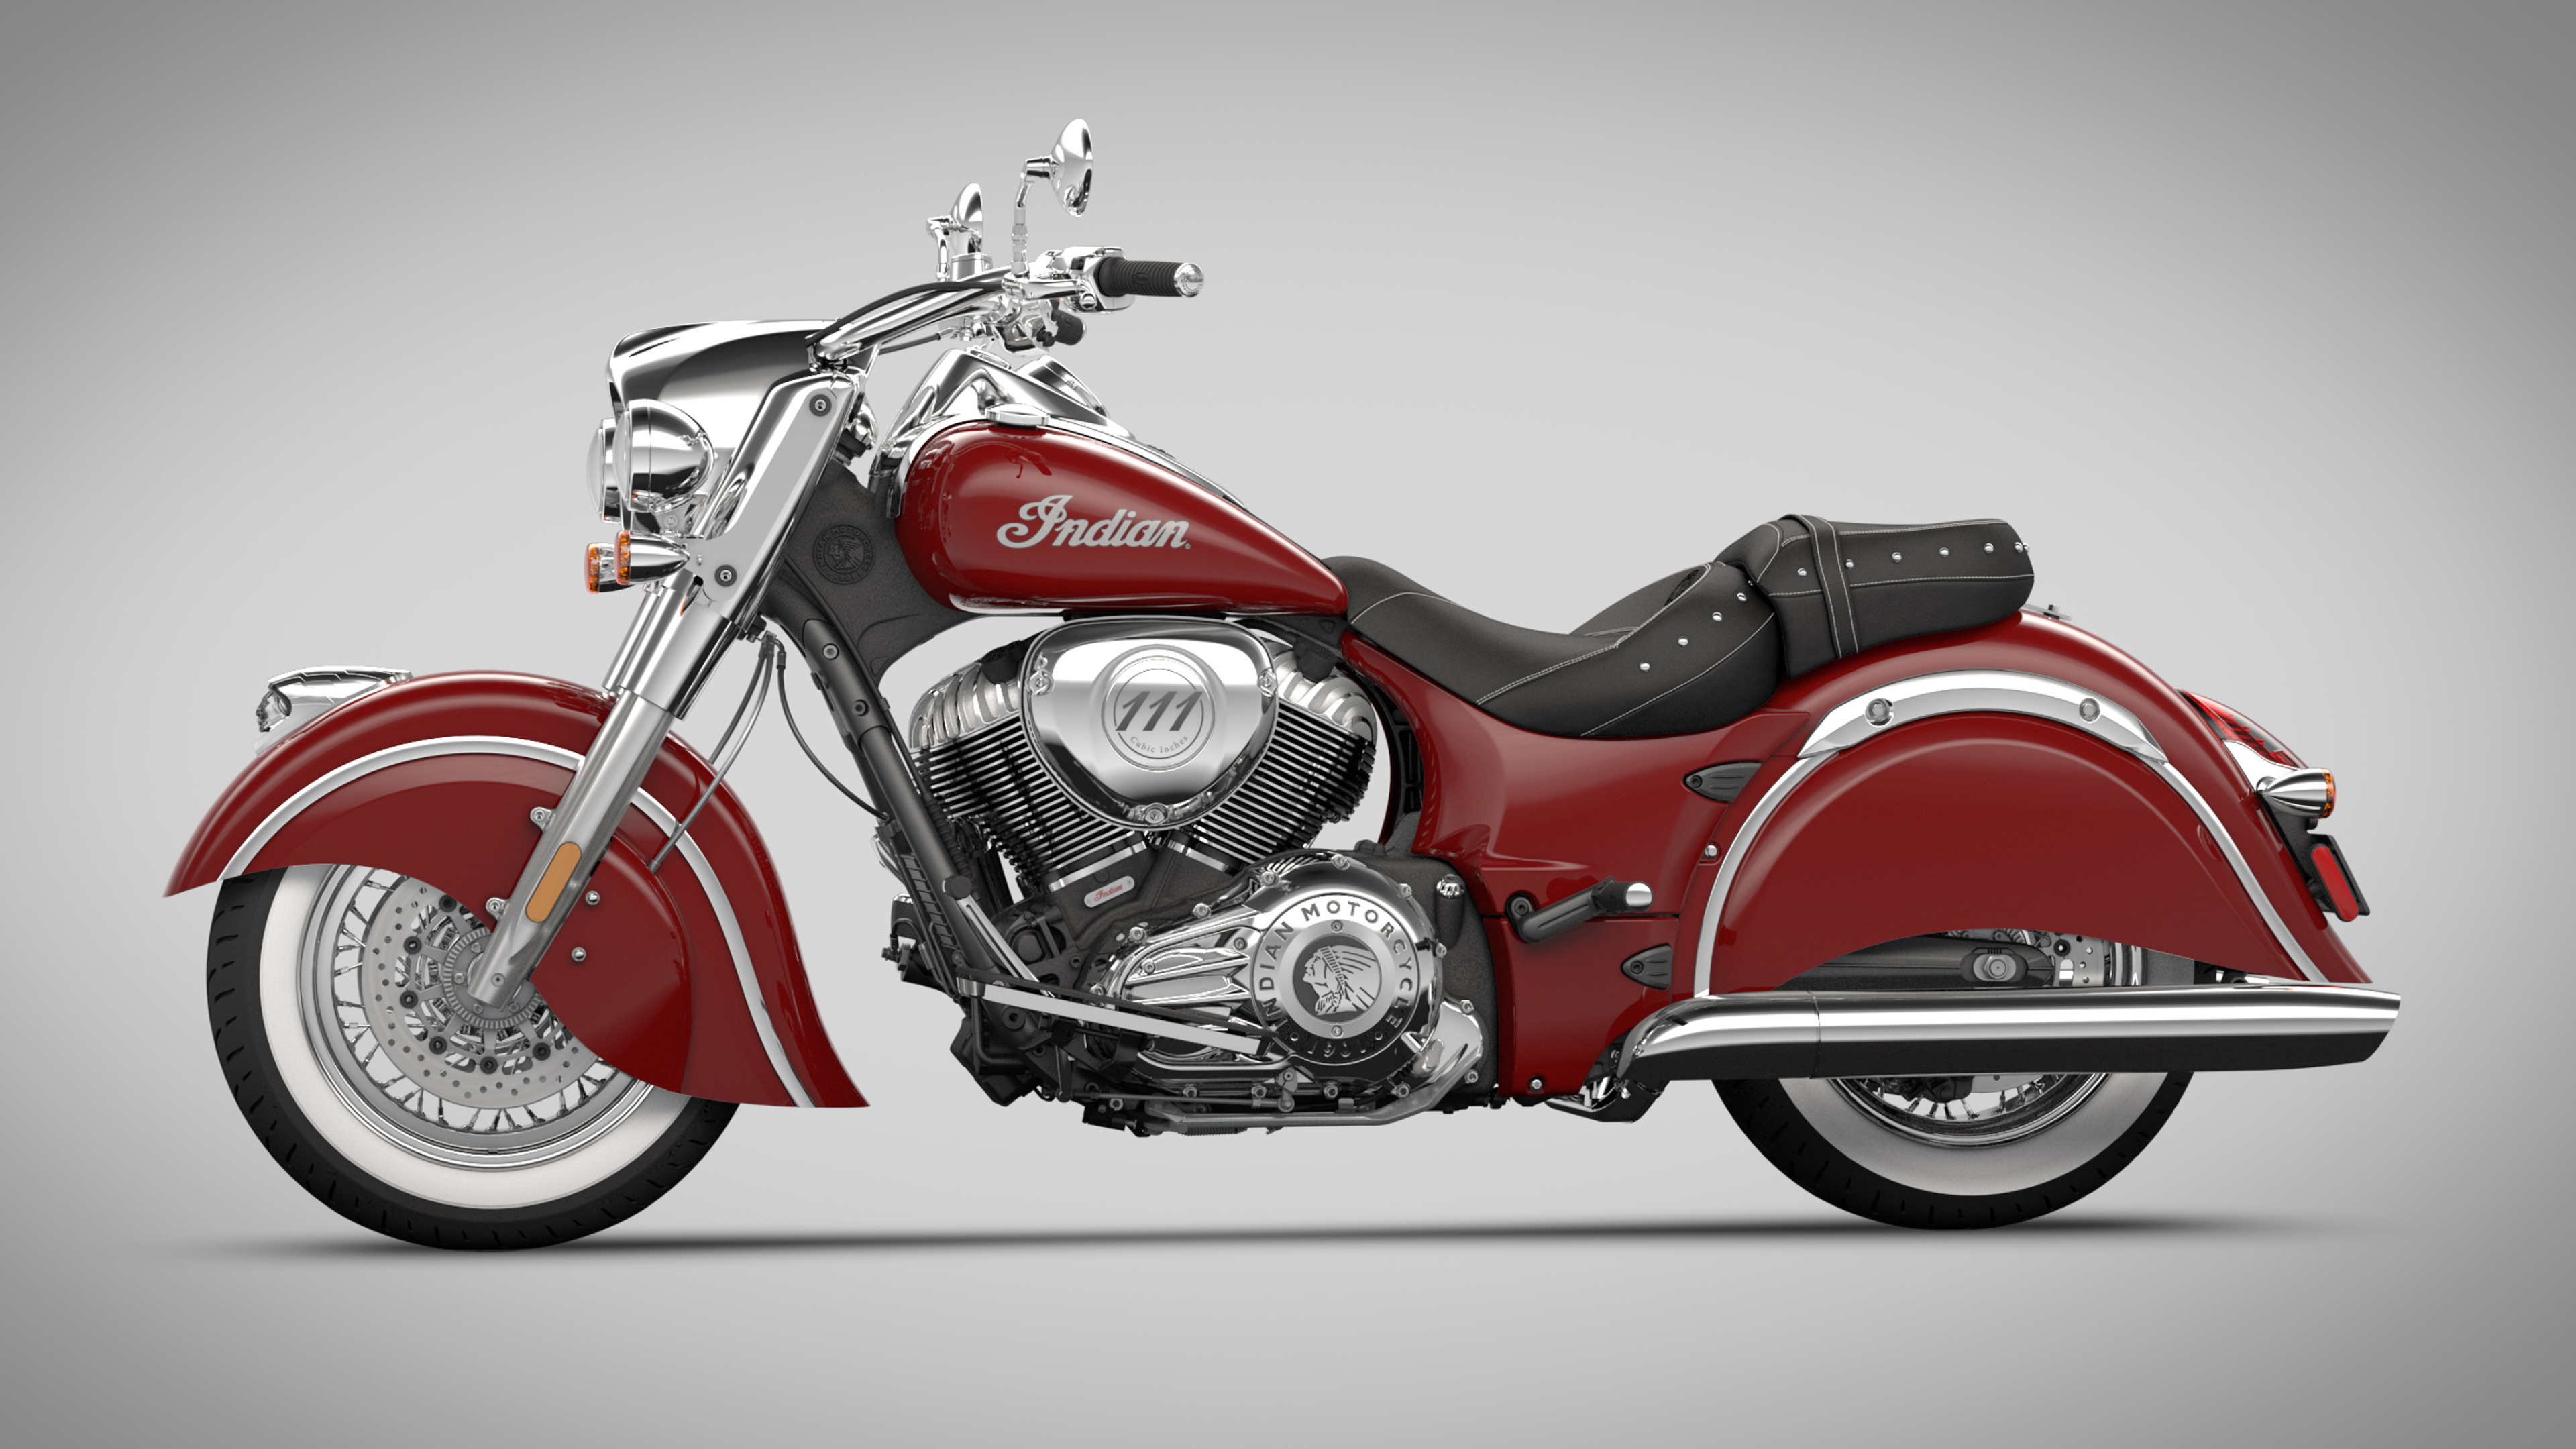 Indian Chief Classic motorcycle desktop wallpapers 4K Ultra HD 3840x2160